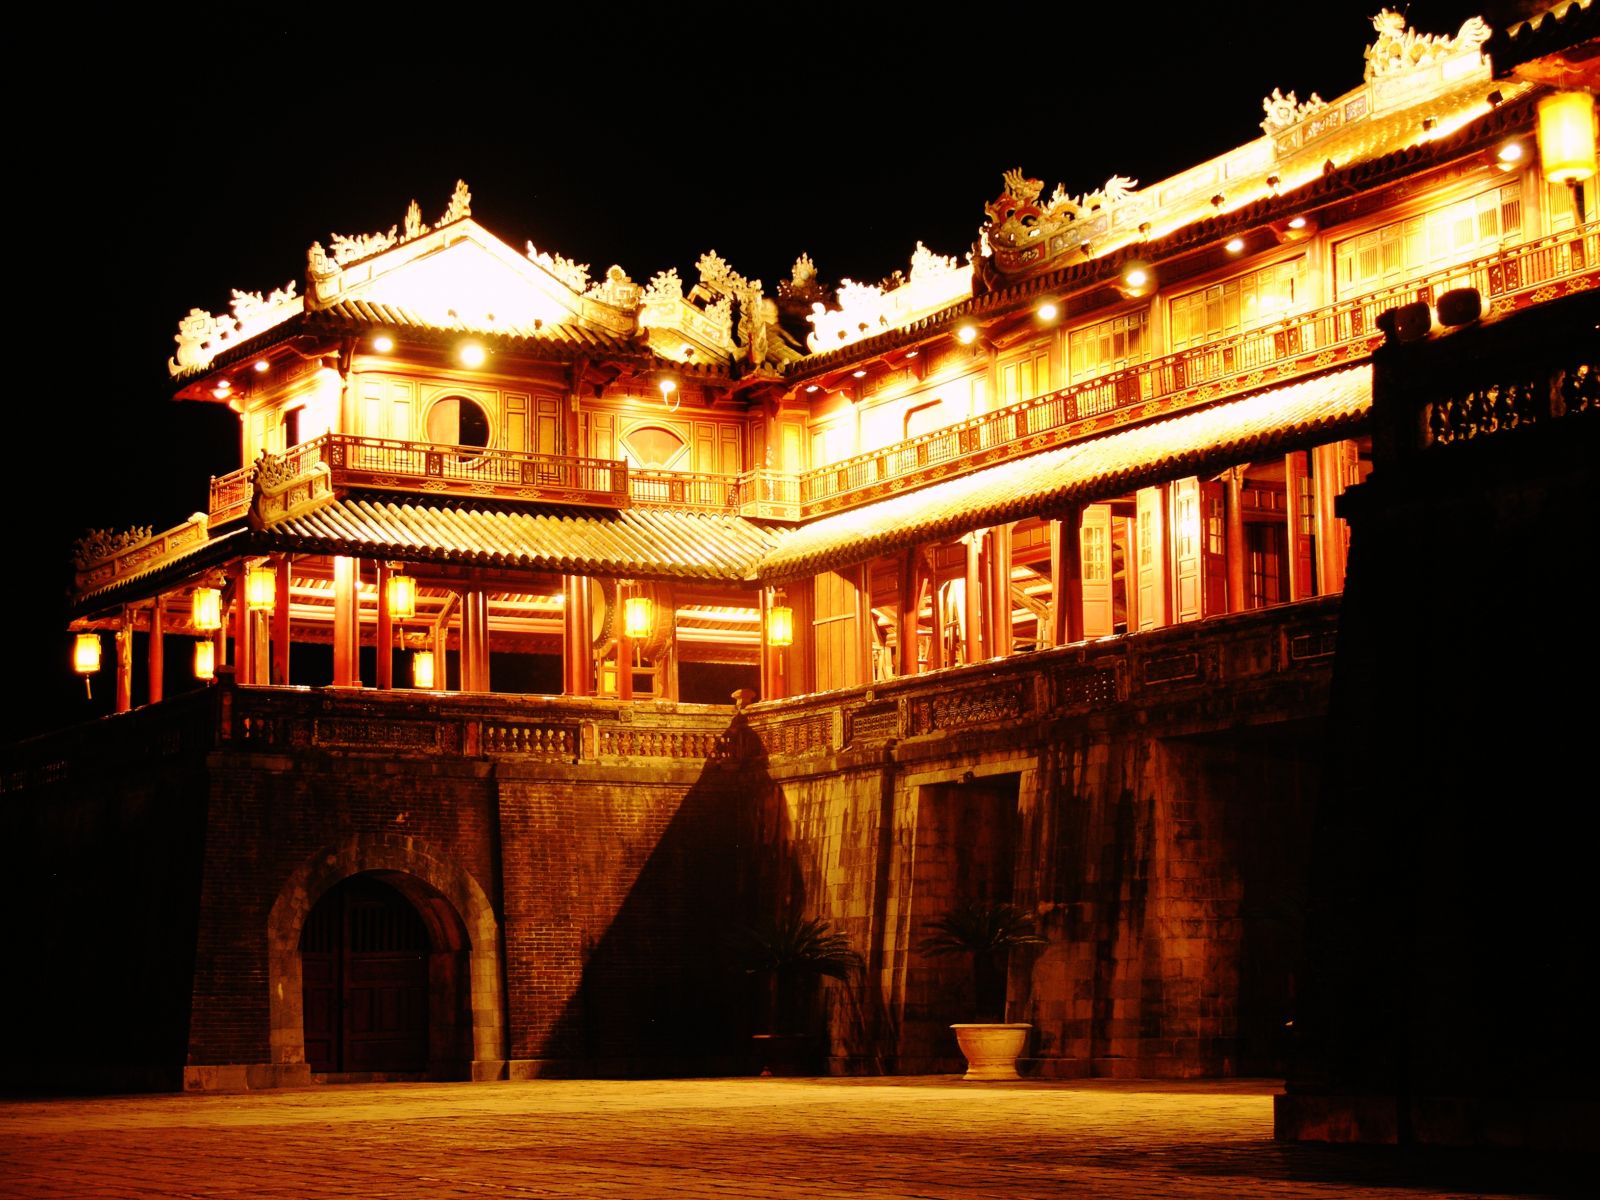 The Imperial City in Hue